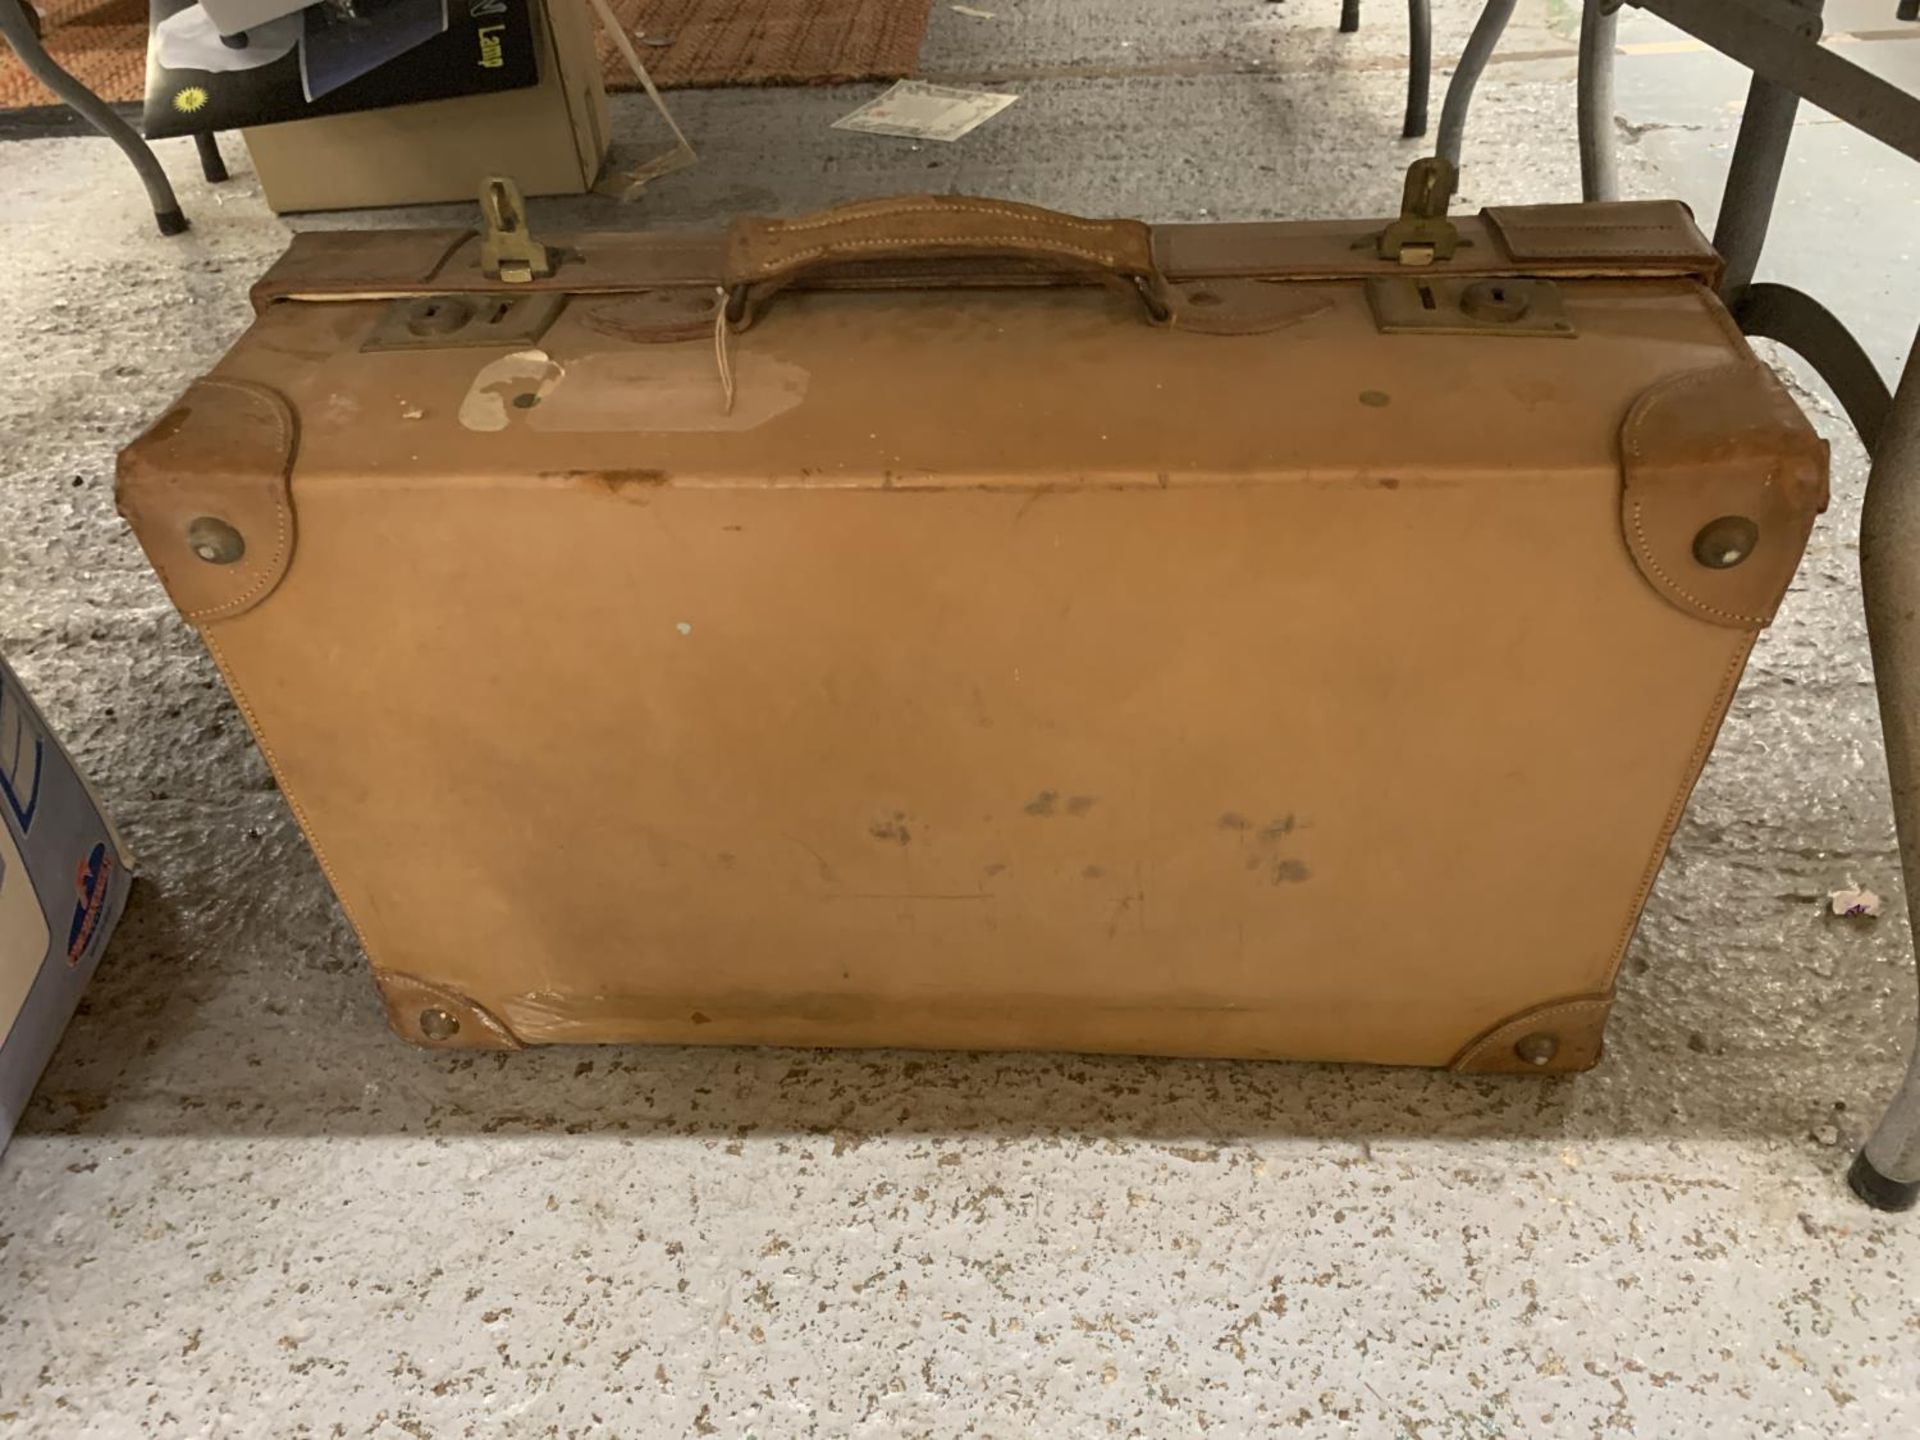 A VINTAGE LEATHER SUITCASE - Image 3 of 3